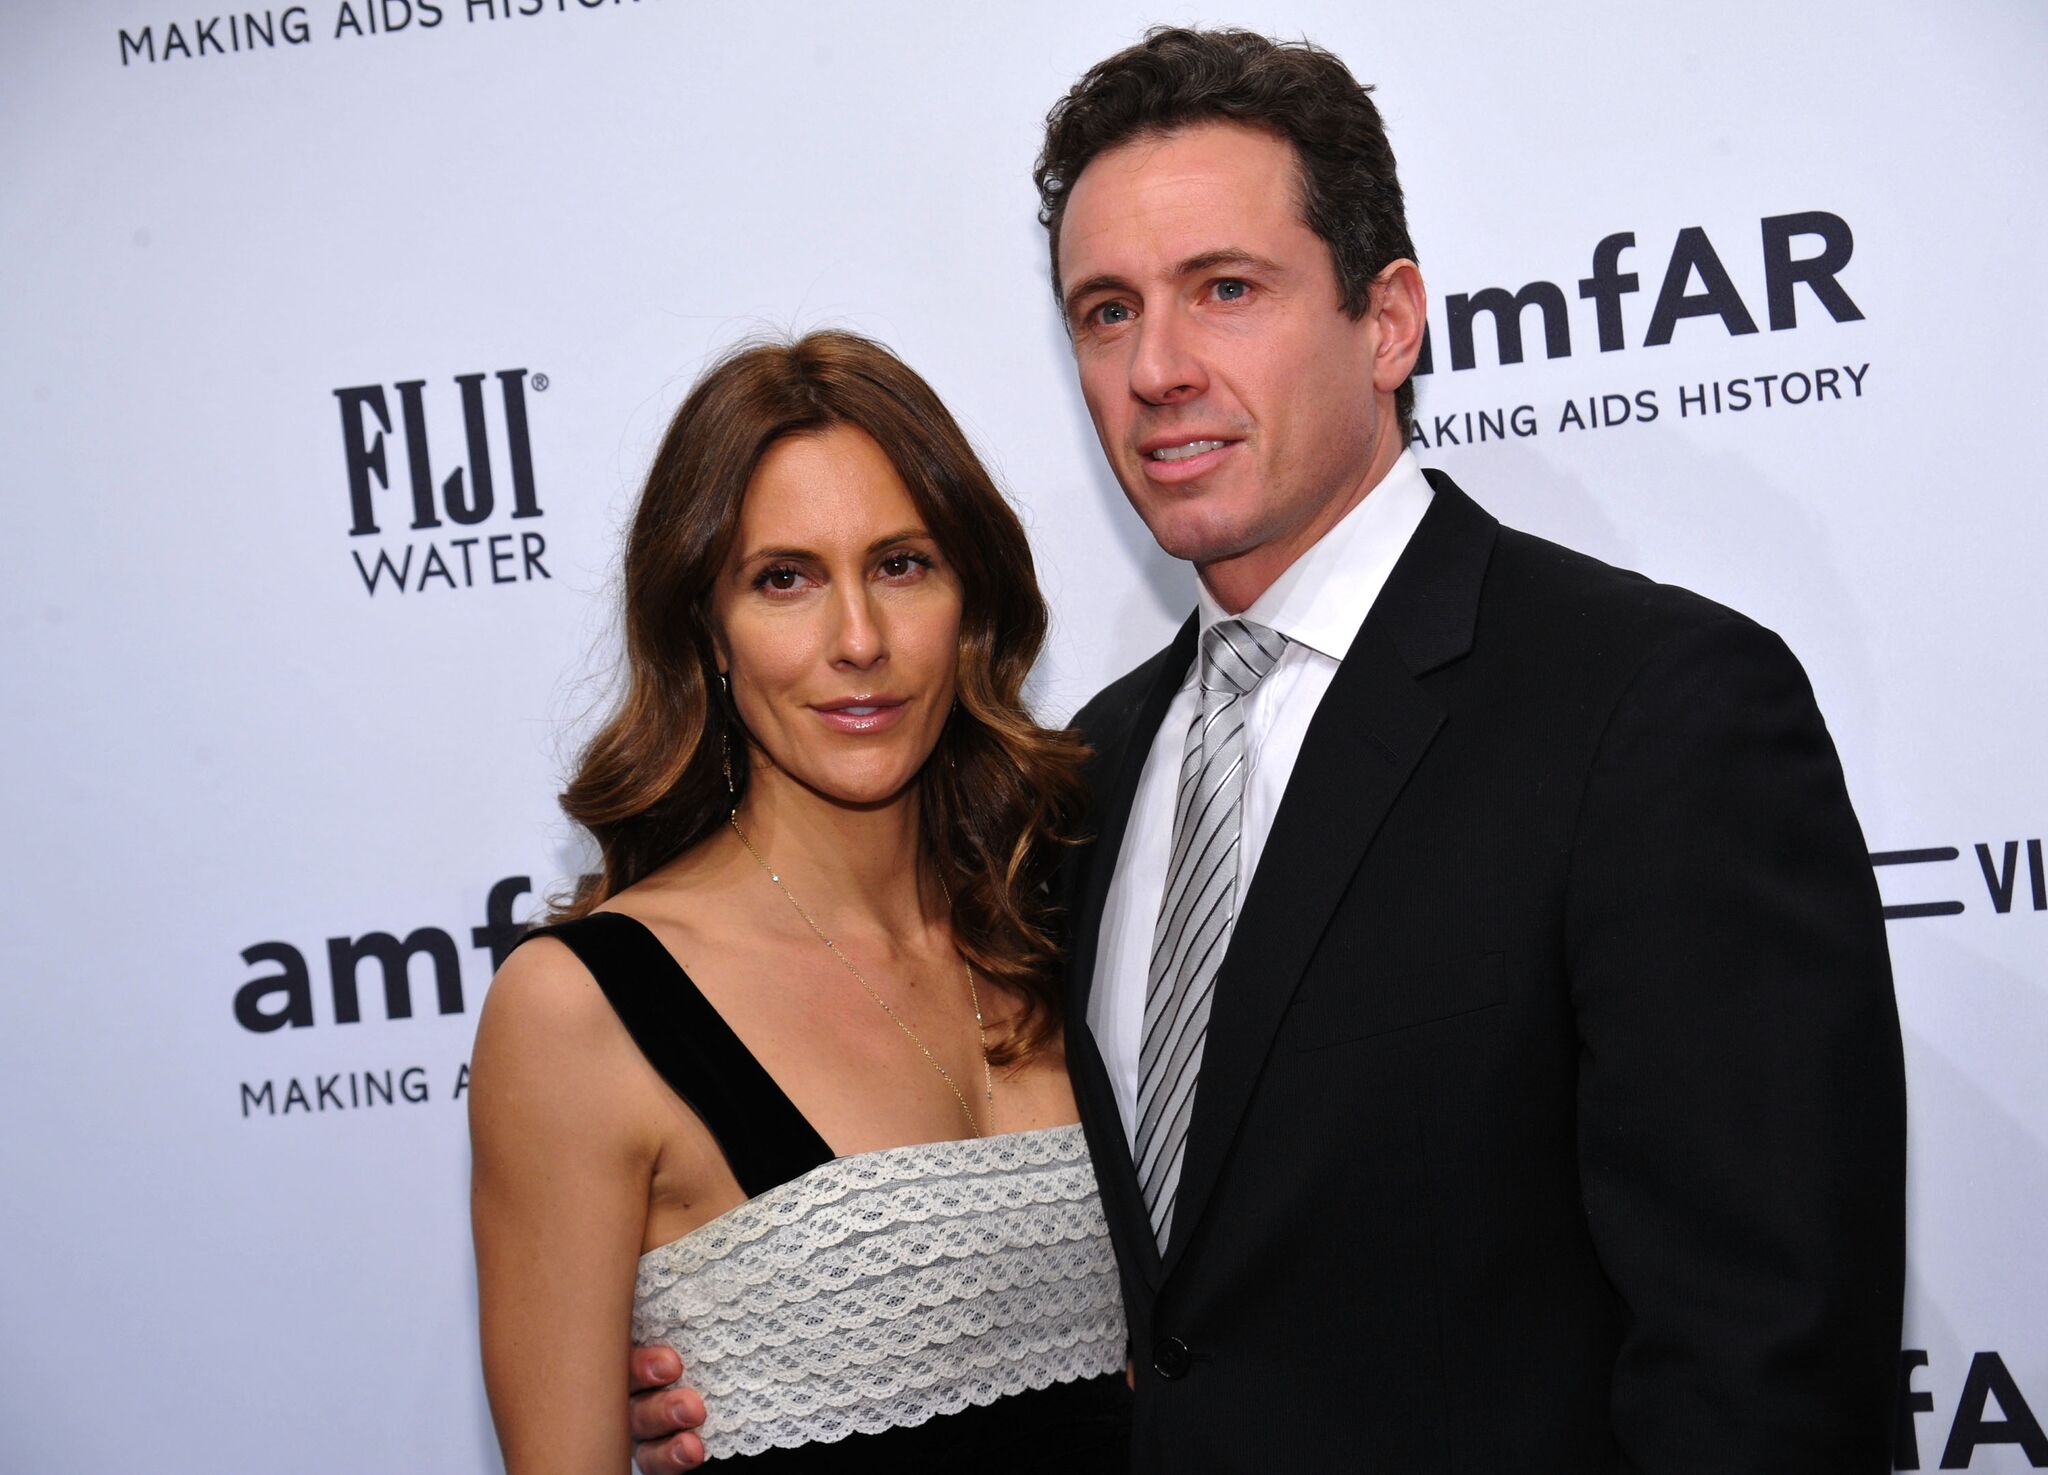 Cristina Cuomo and Chris Cuomo attend the amfAR New York Gala to kick off Fall 2013 Fashion Week at Cipriani Wall Street on February 6, 2013 in New York City | Photo: Getty Images